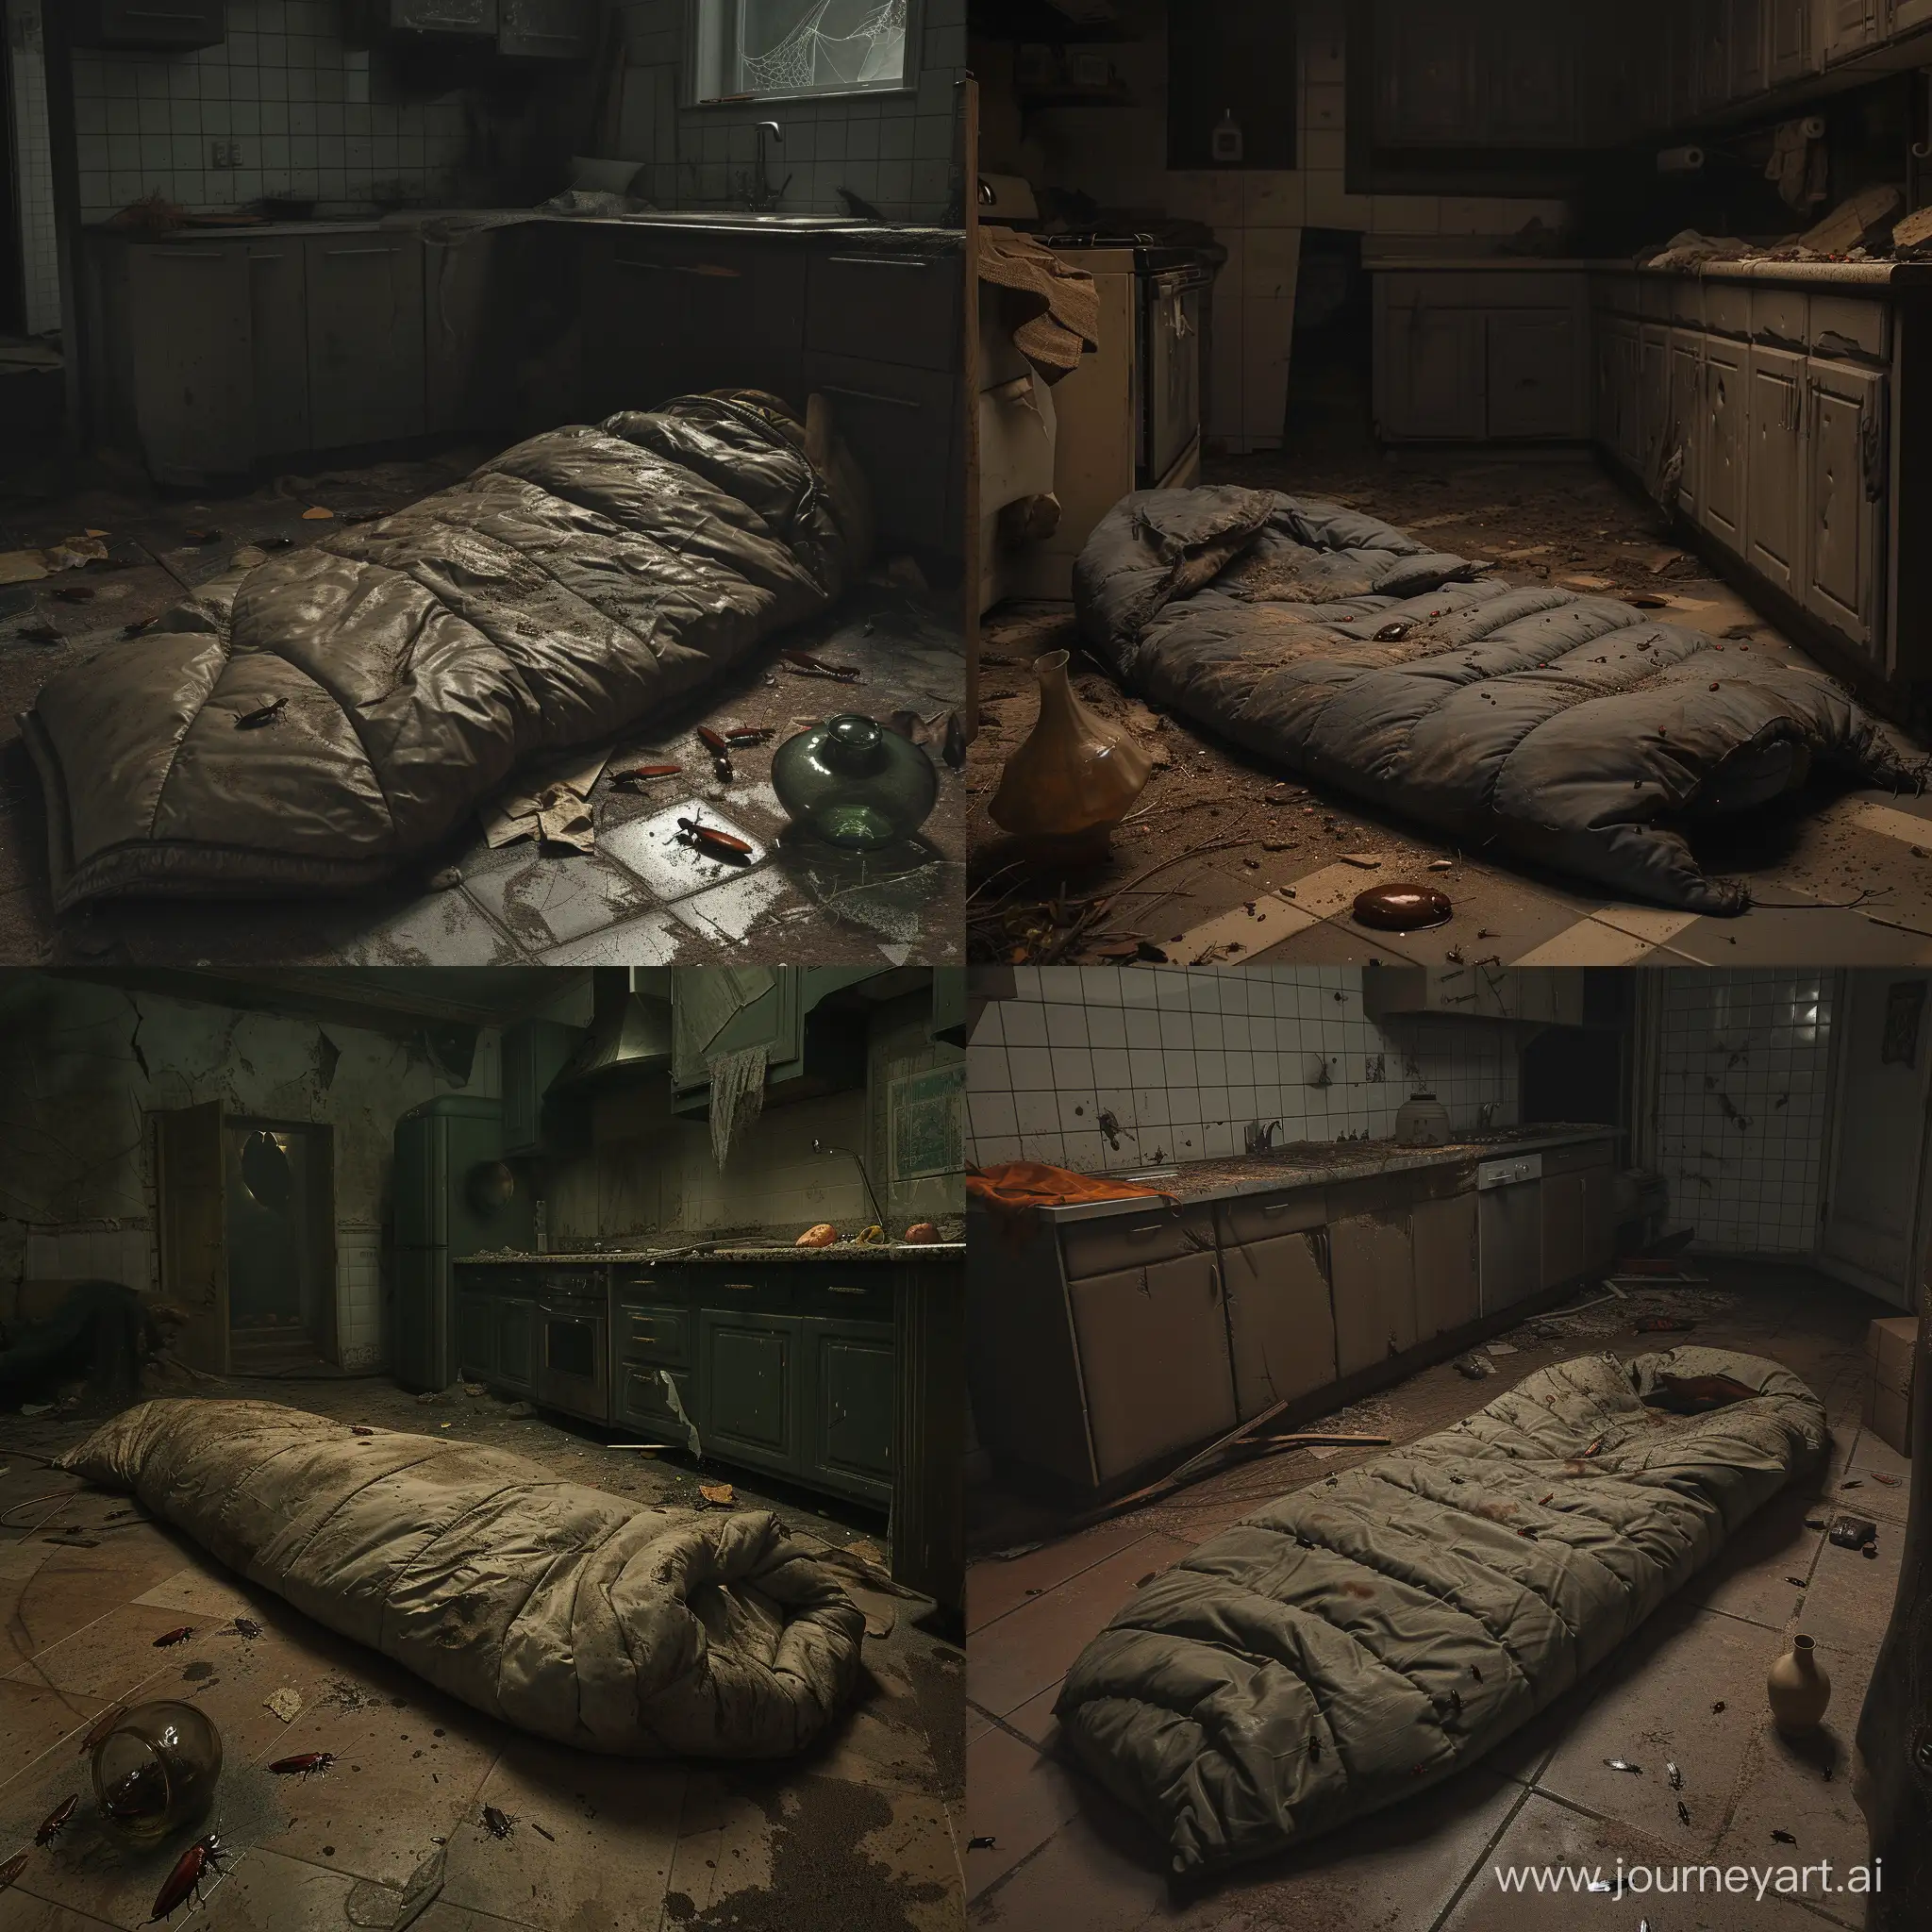 Abandoned-Darkness-Desolate-Kitchen-with-a-Tattered-Sleeping-Bag-and-Broken-Vase